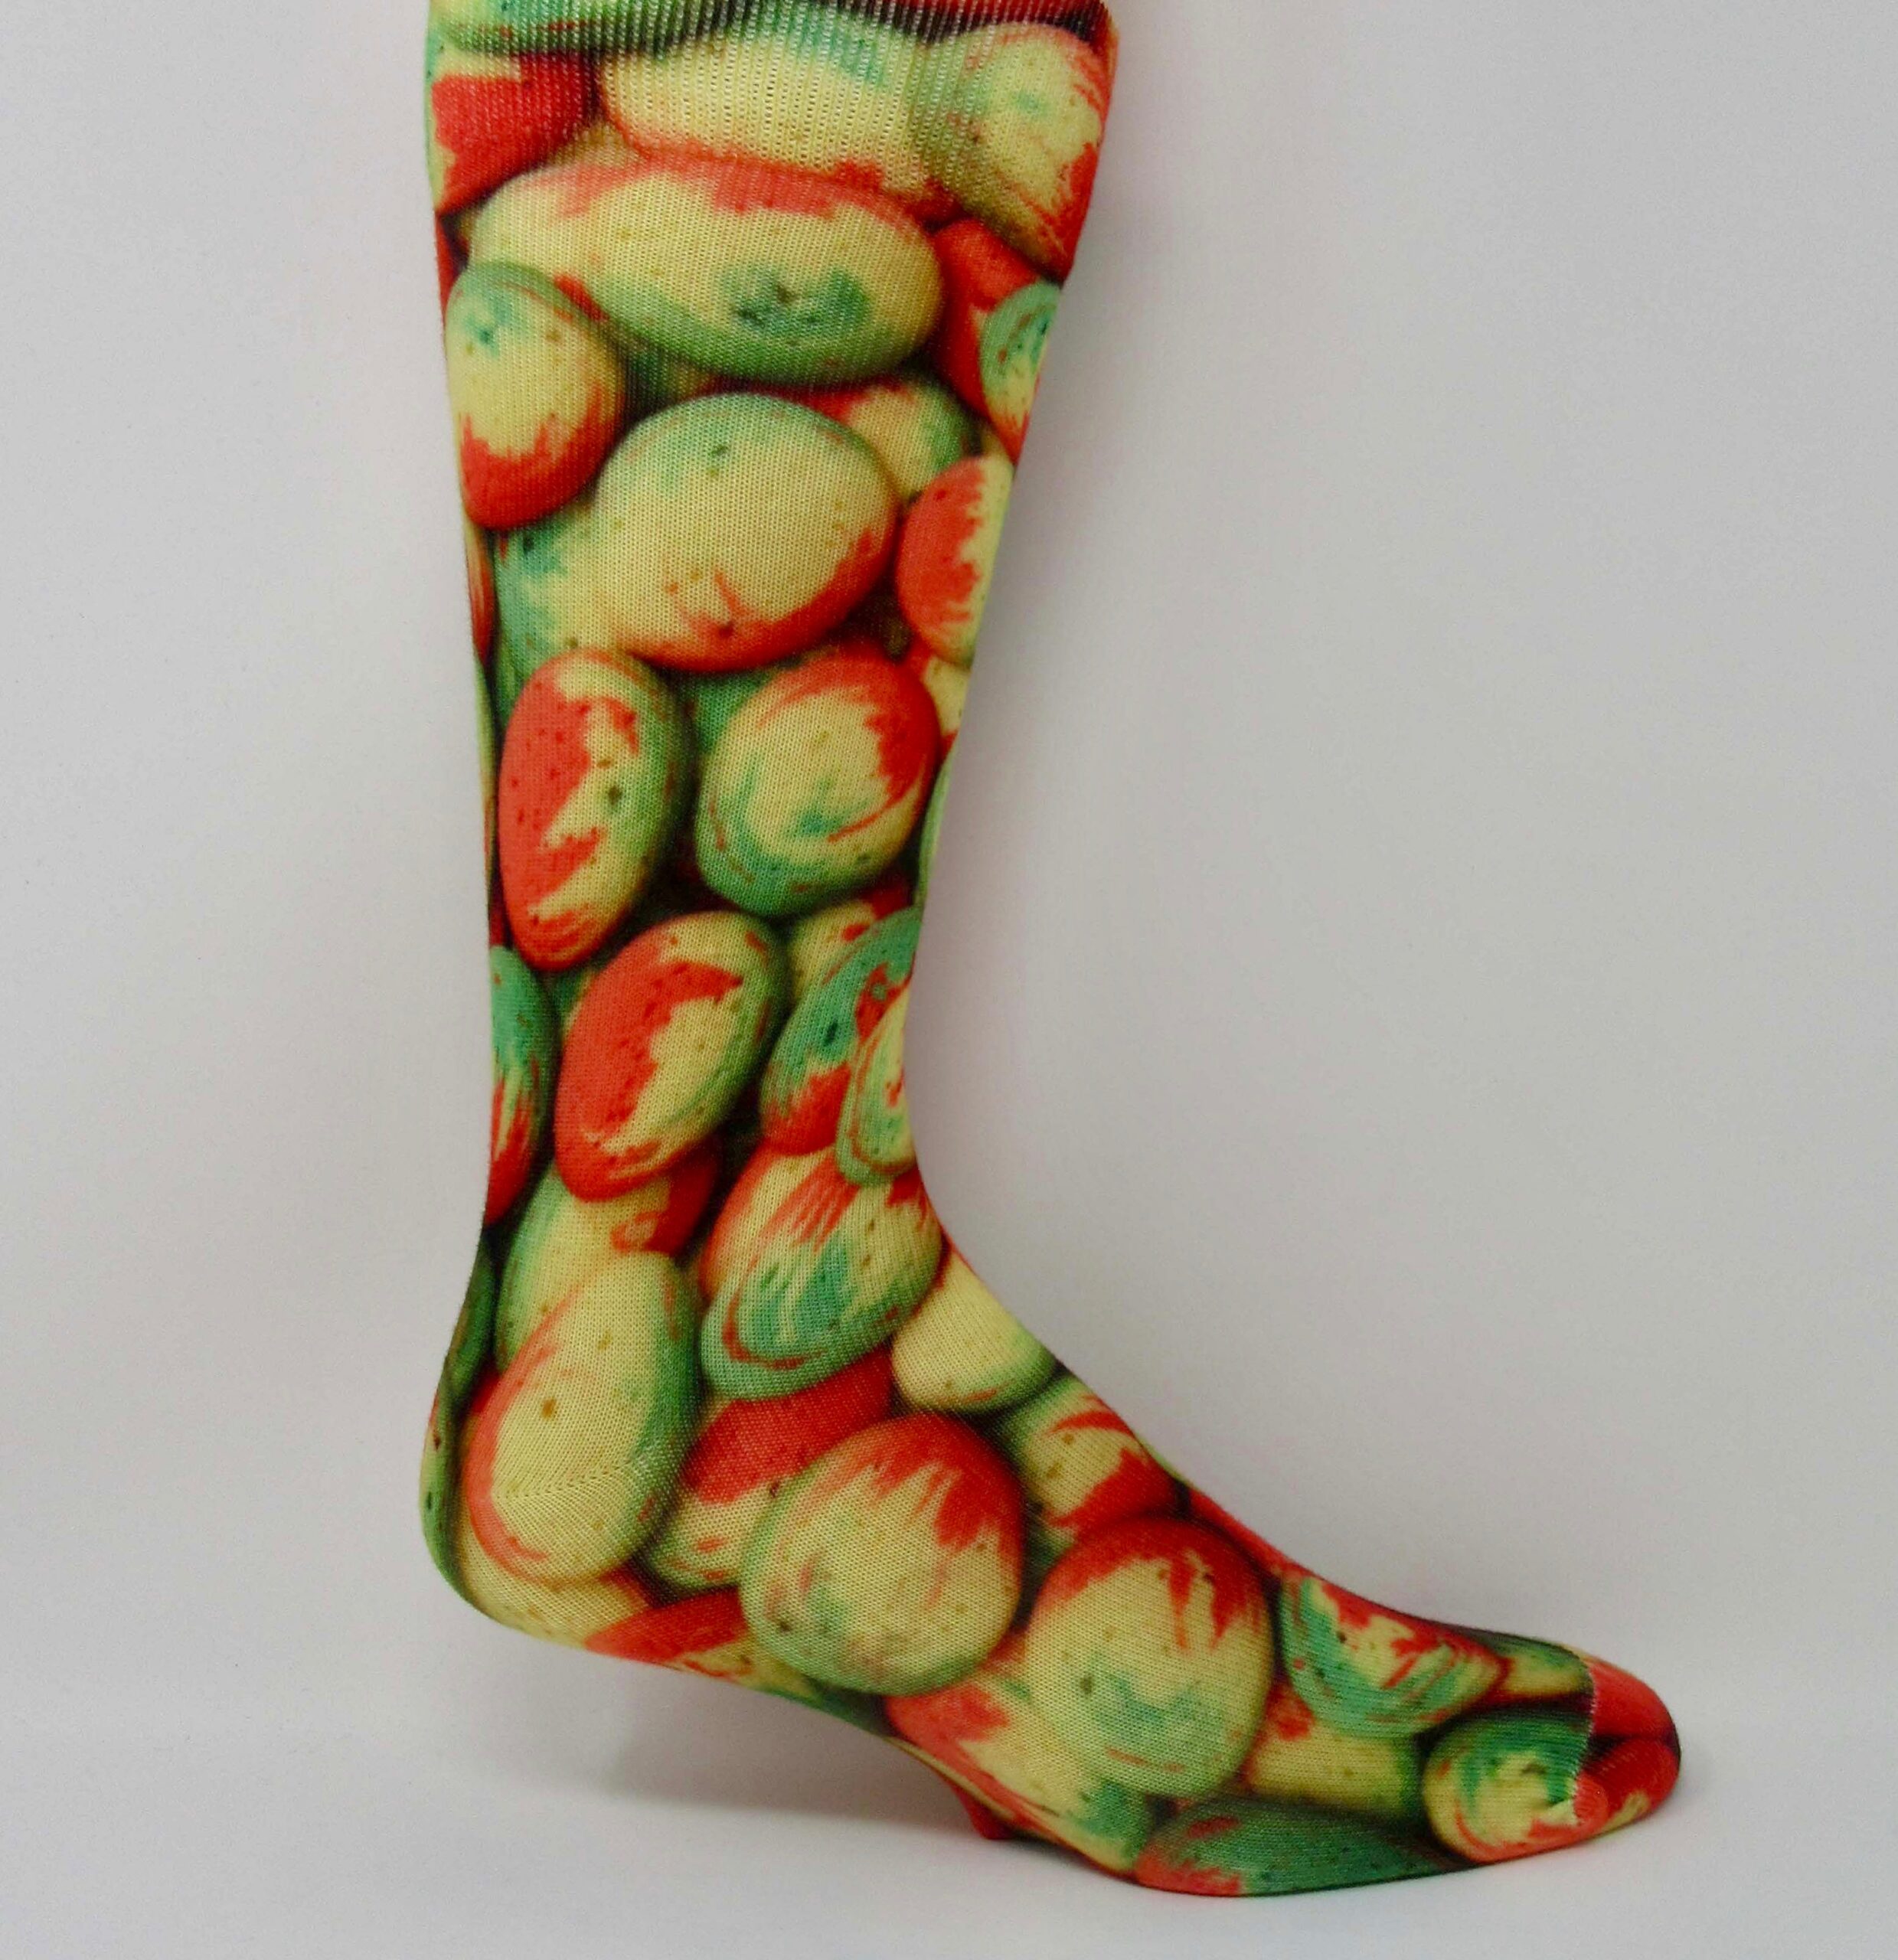 A photo of a real pair of Rainbow Cookie Socks.